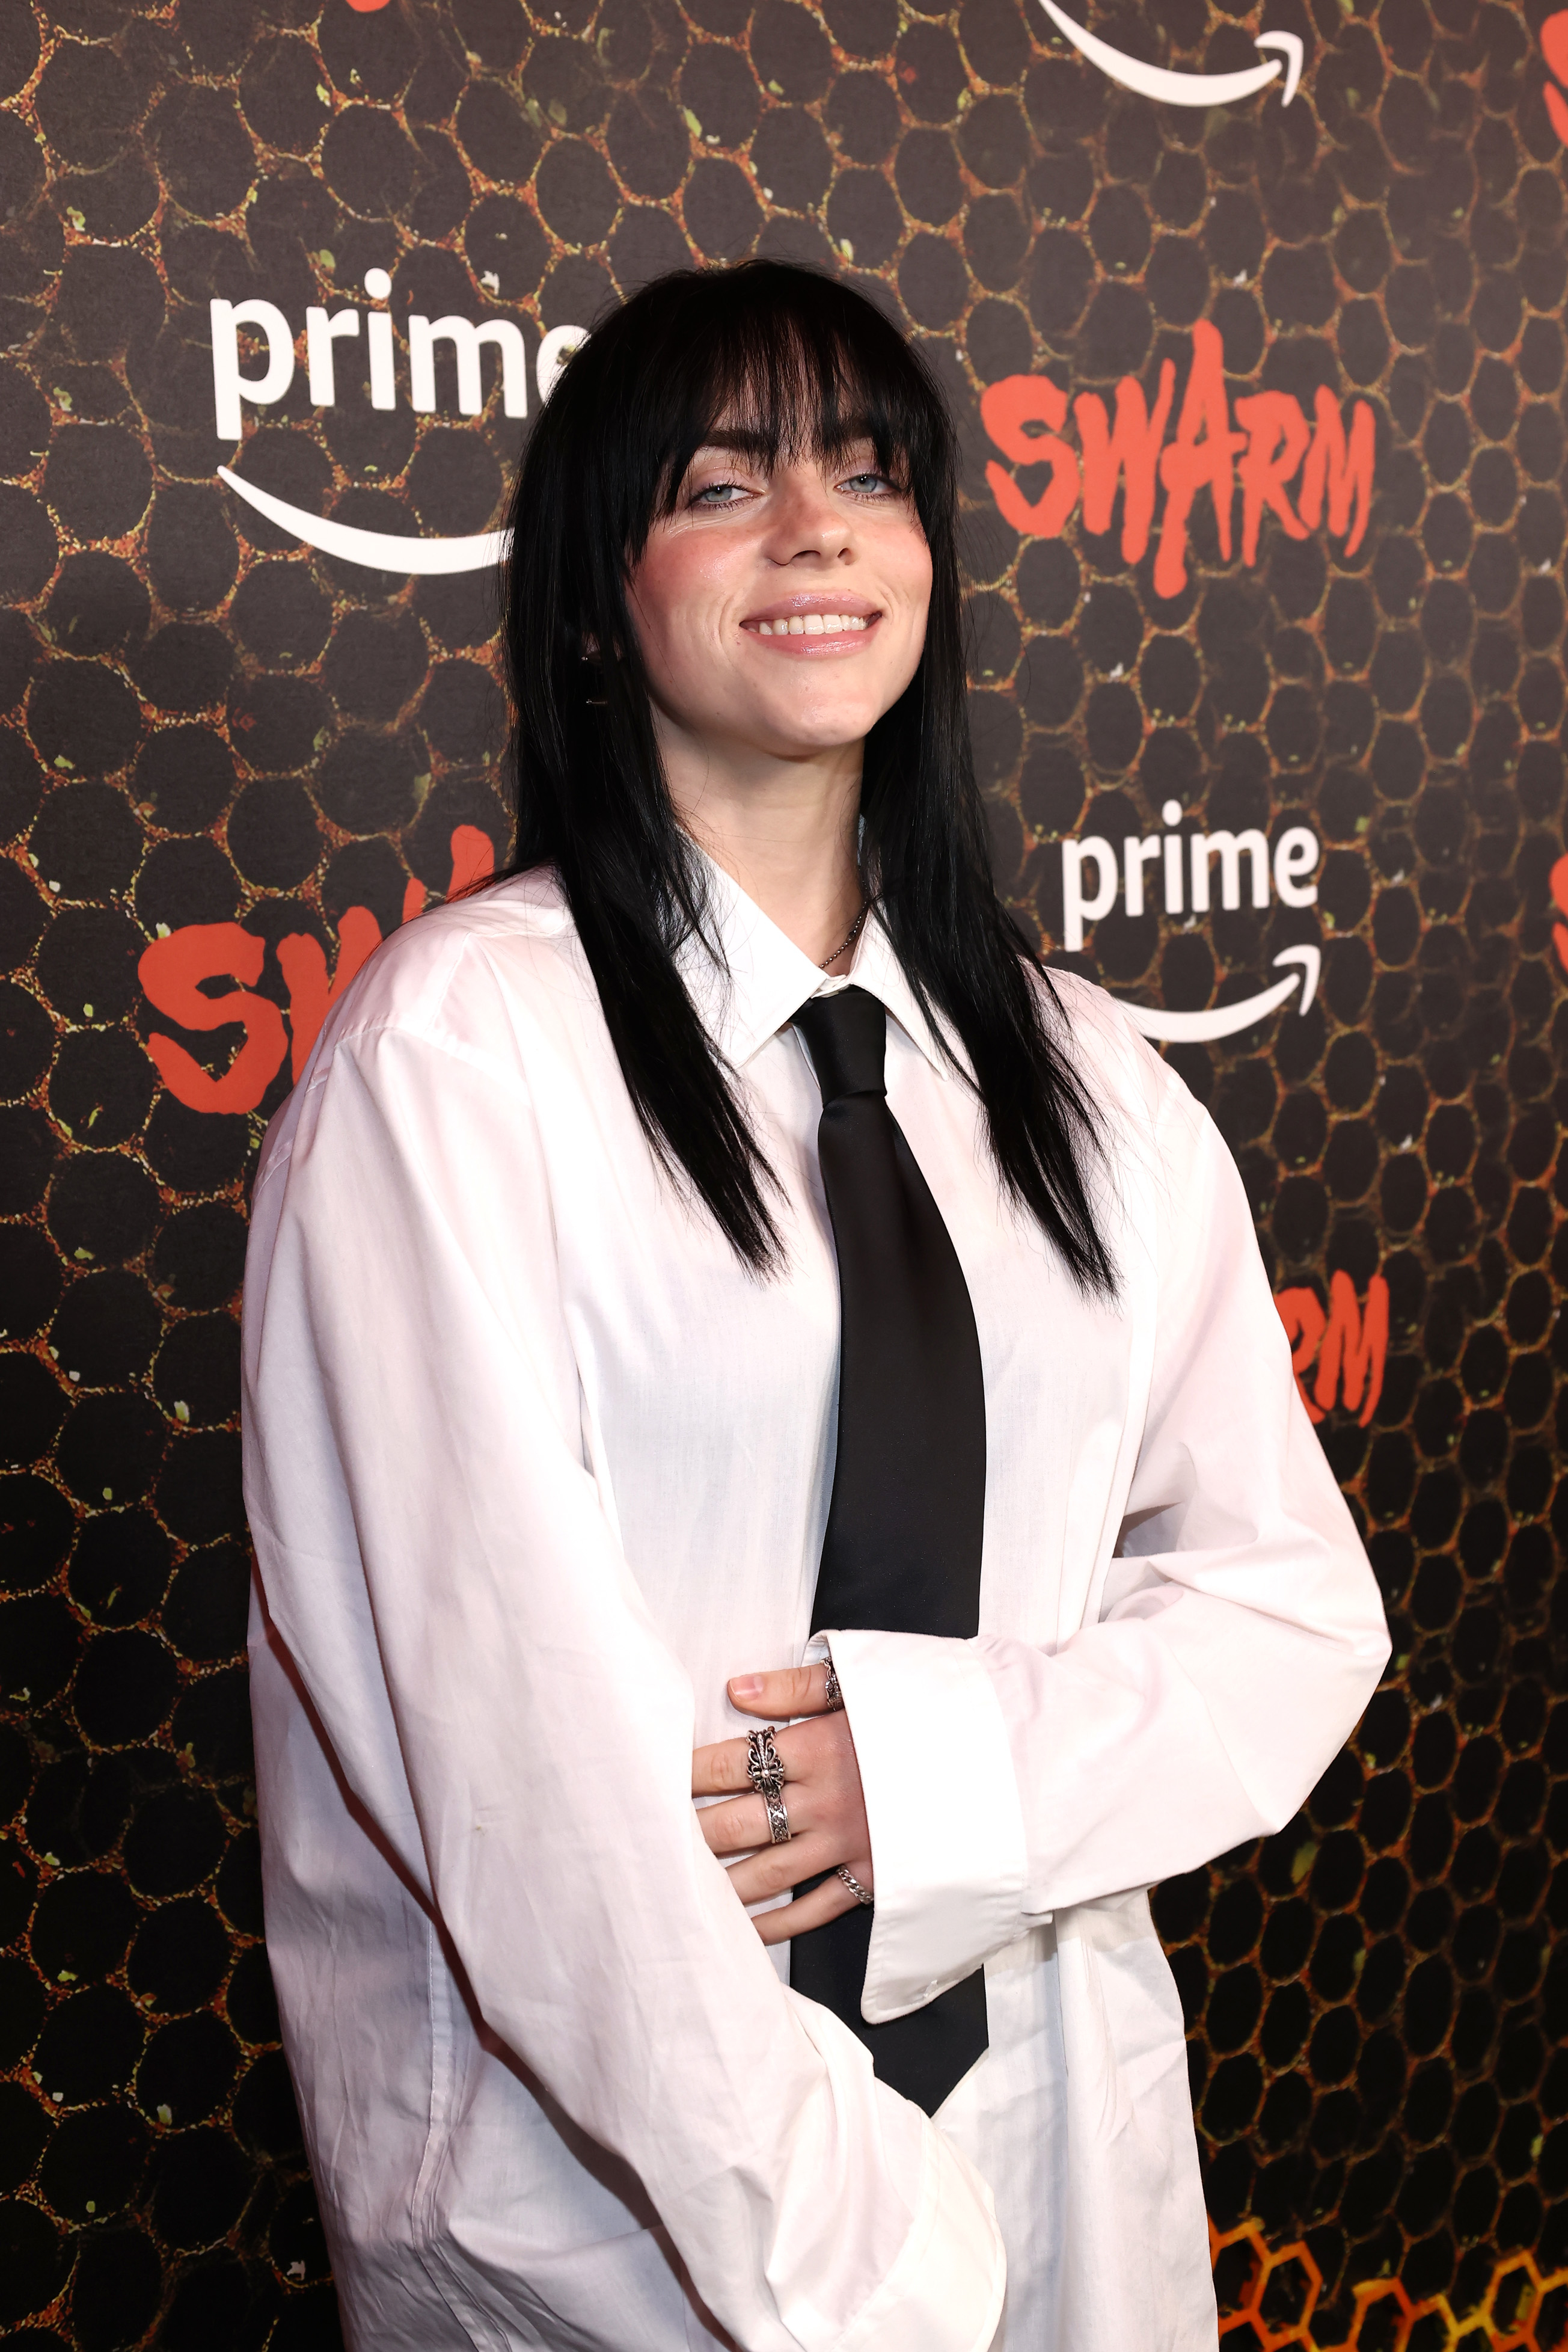 closuep of billie smiling at an event